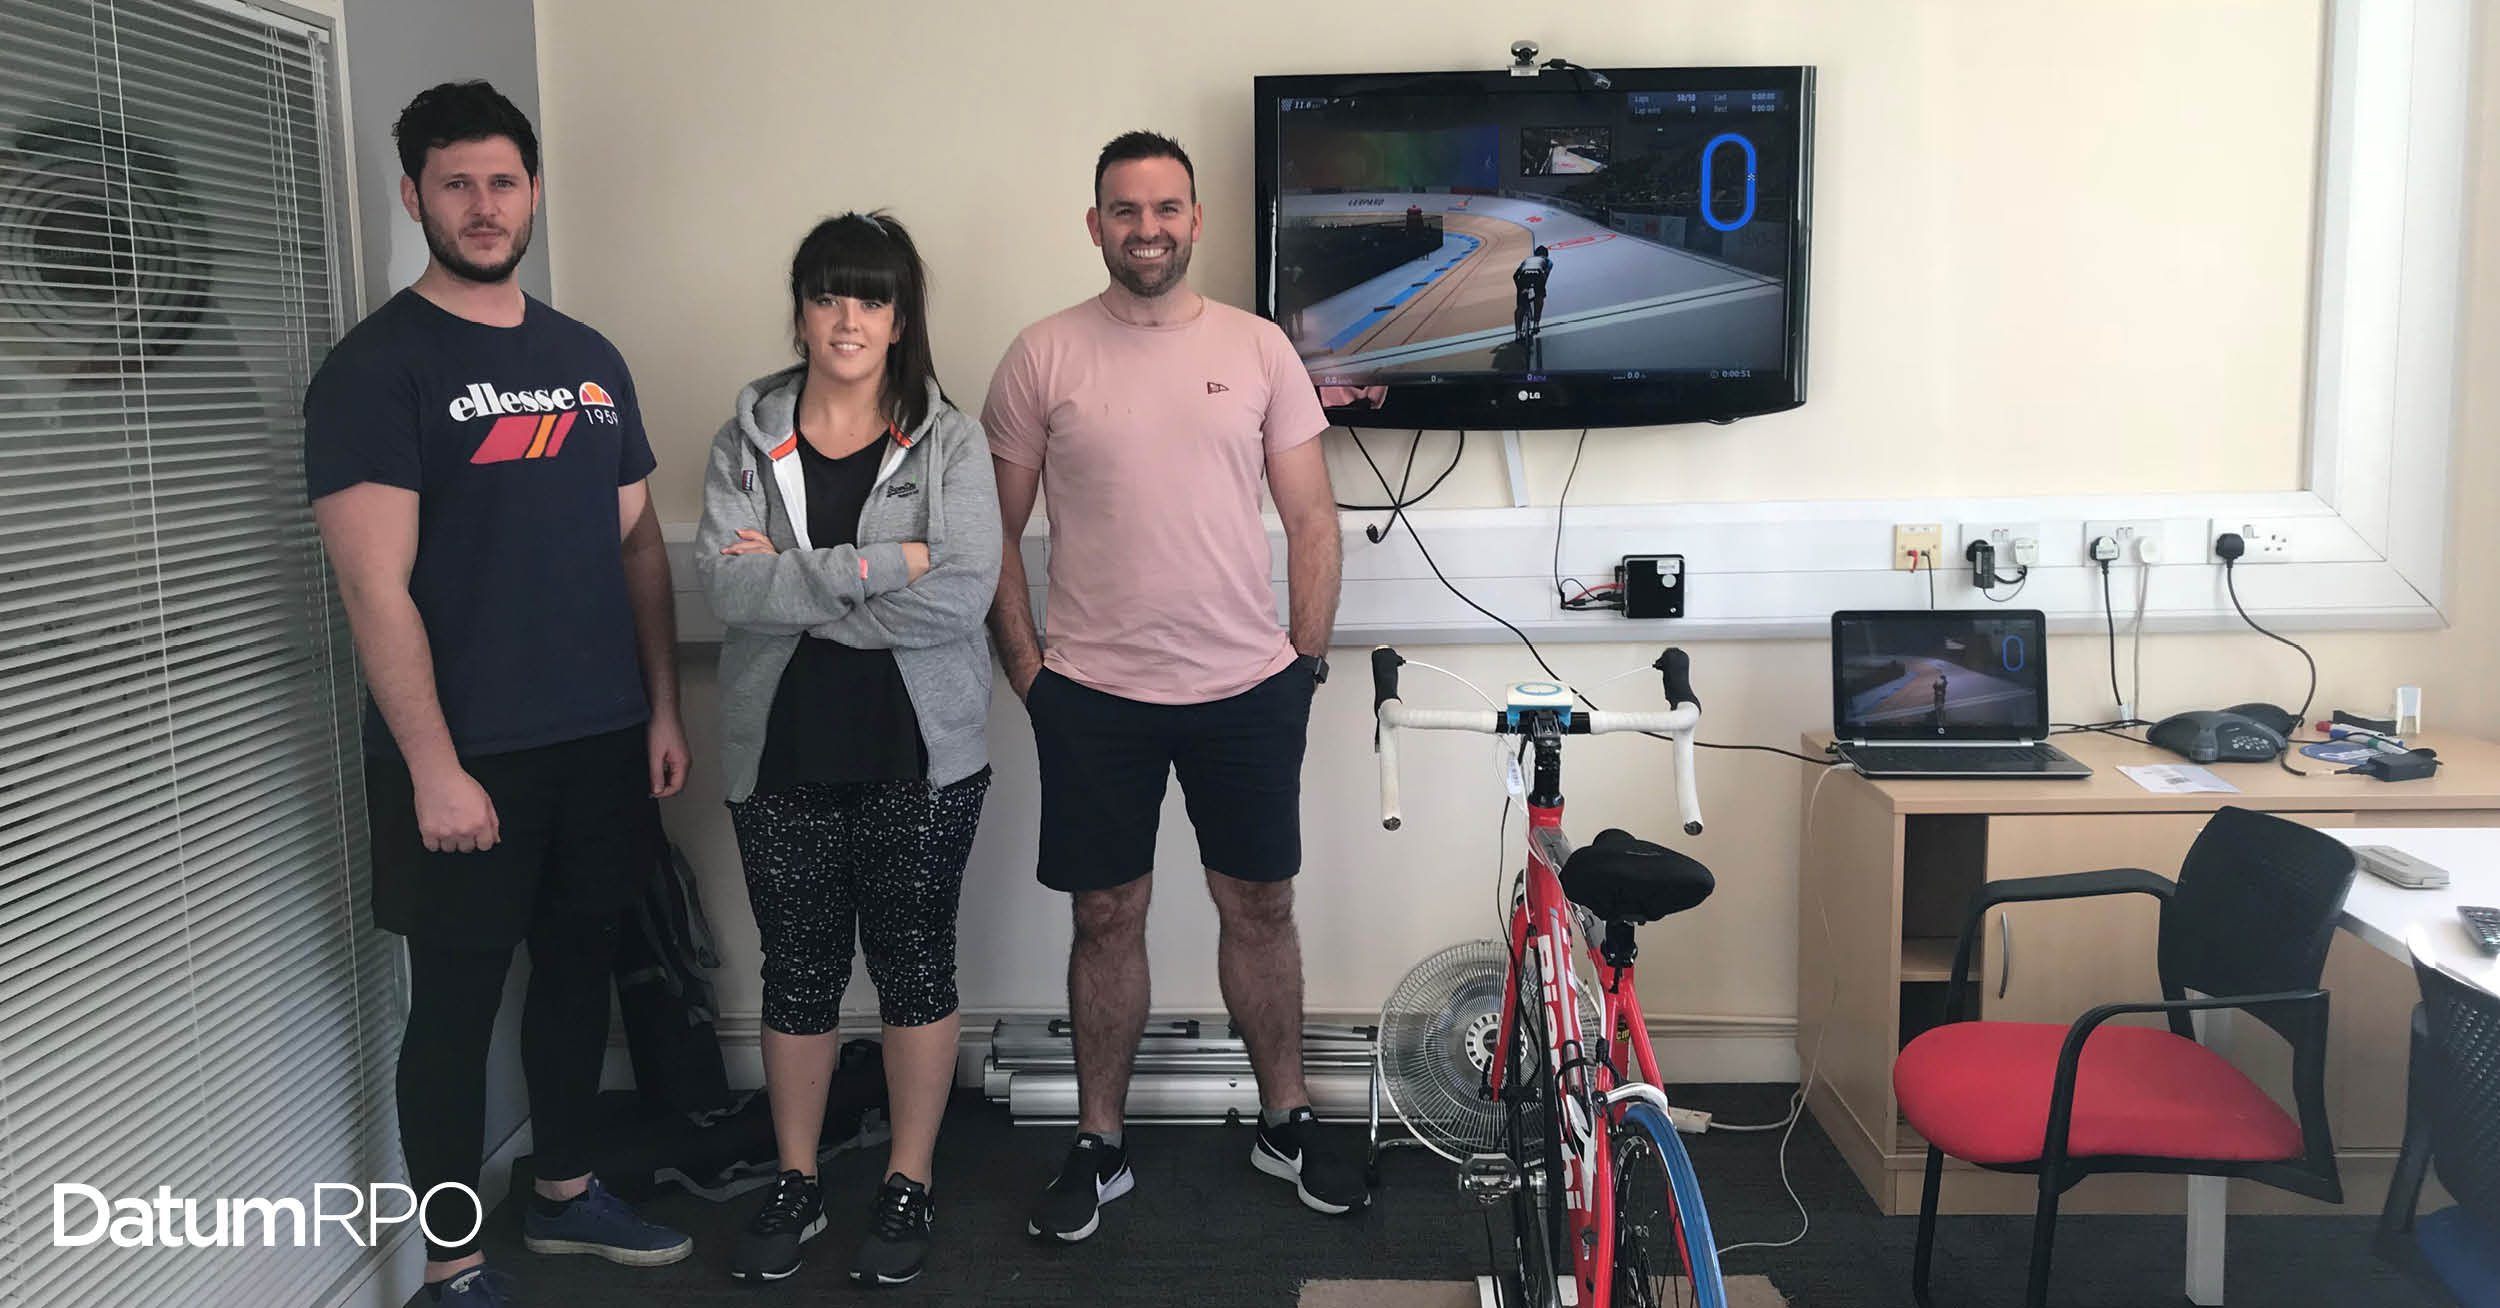 Tour de Datum: Employees cycle 150 (virtual) miles for #PAP2020 charity support year